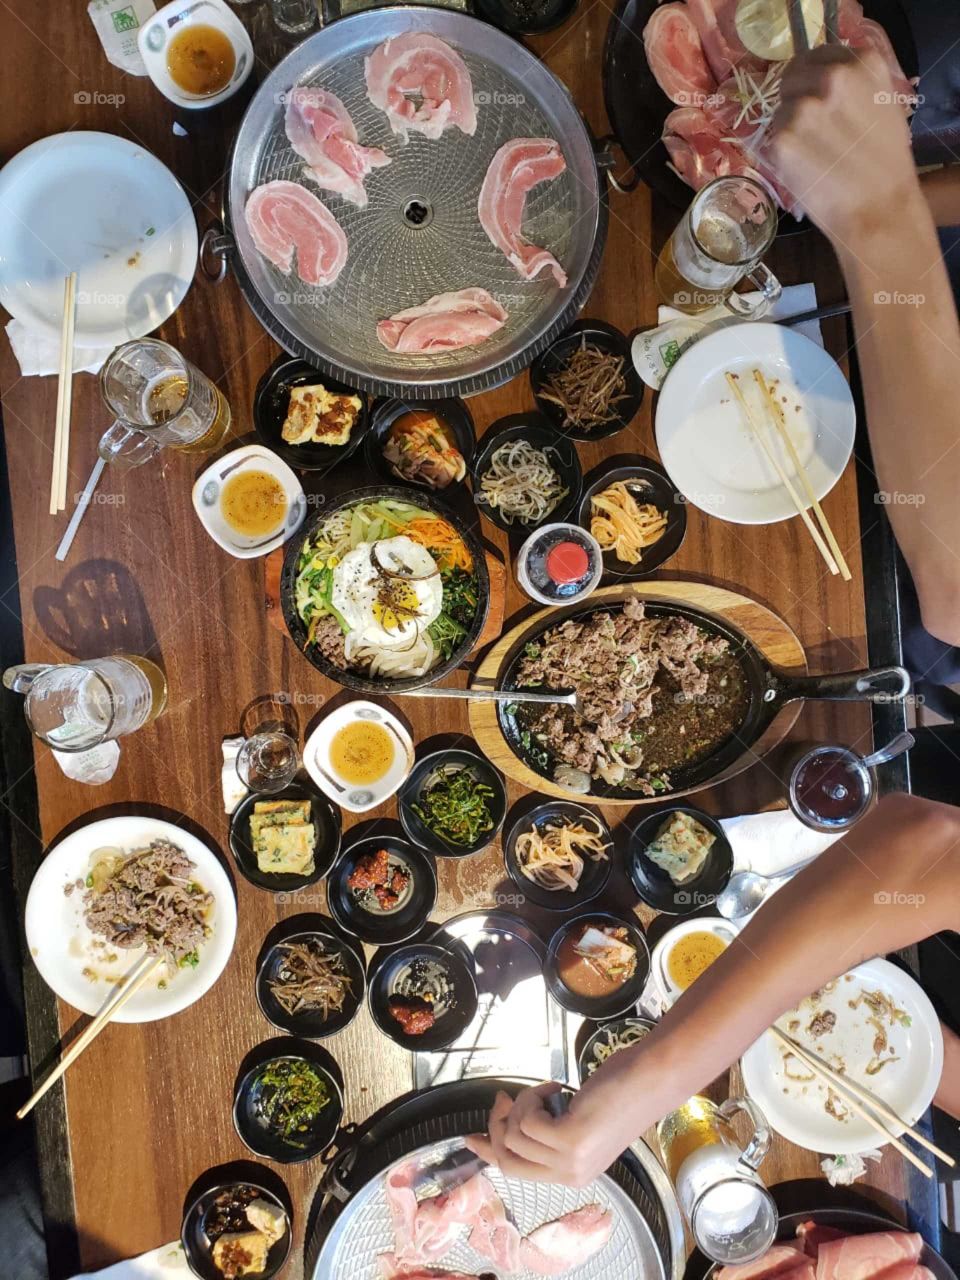 Here is a good way to celebrate life and get together with best friends. Korean feast is socially delicious! Have lots of fun mixing ingredients, chatting out loud    and making lots of smoke!